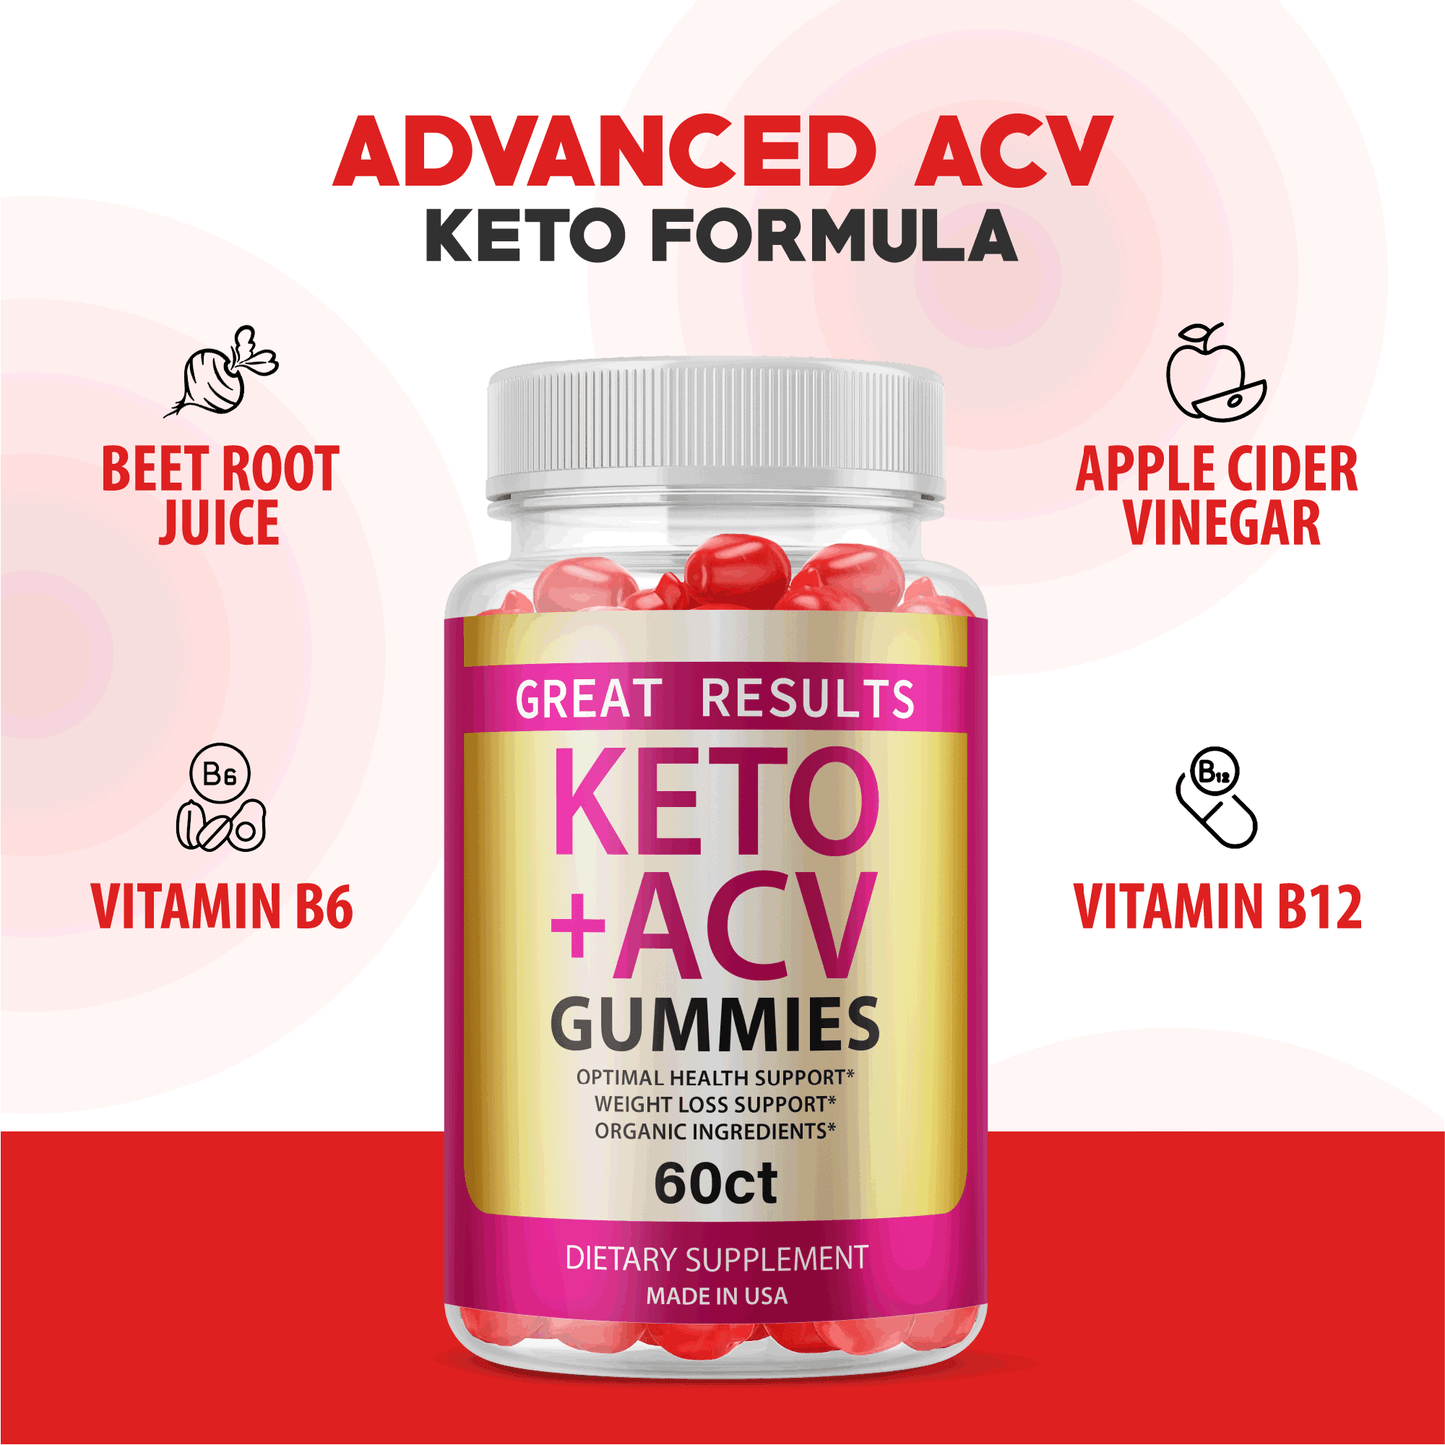 2 Great Results ACV Gummies; Great Keto Plus Gummies; Advanced Weight Loss; 120